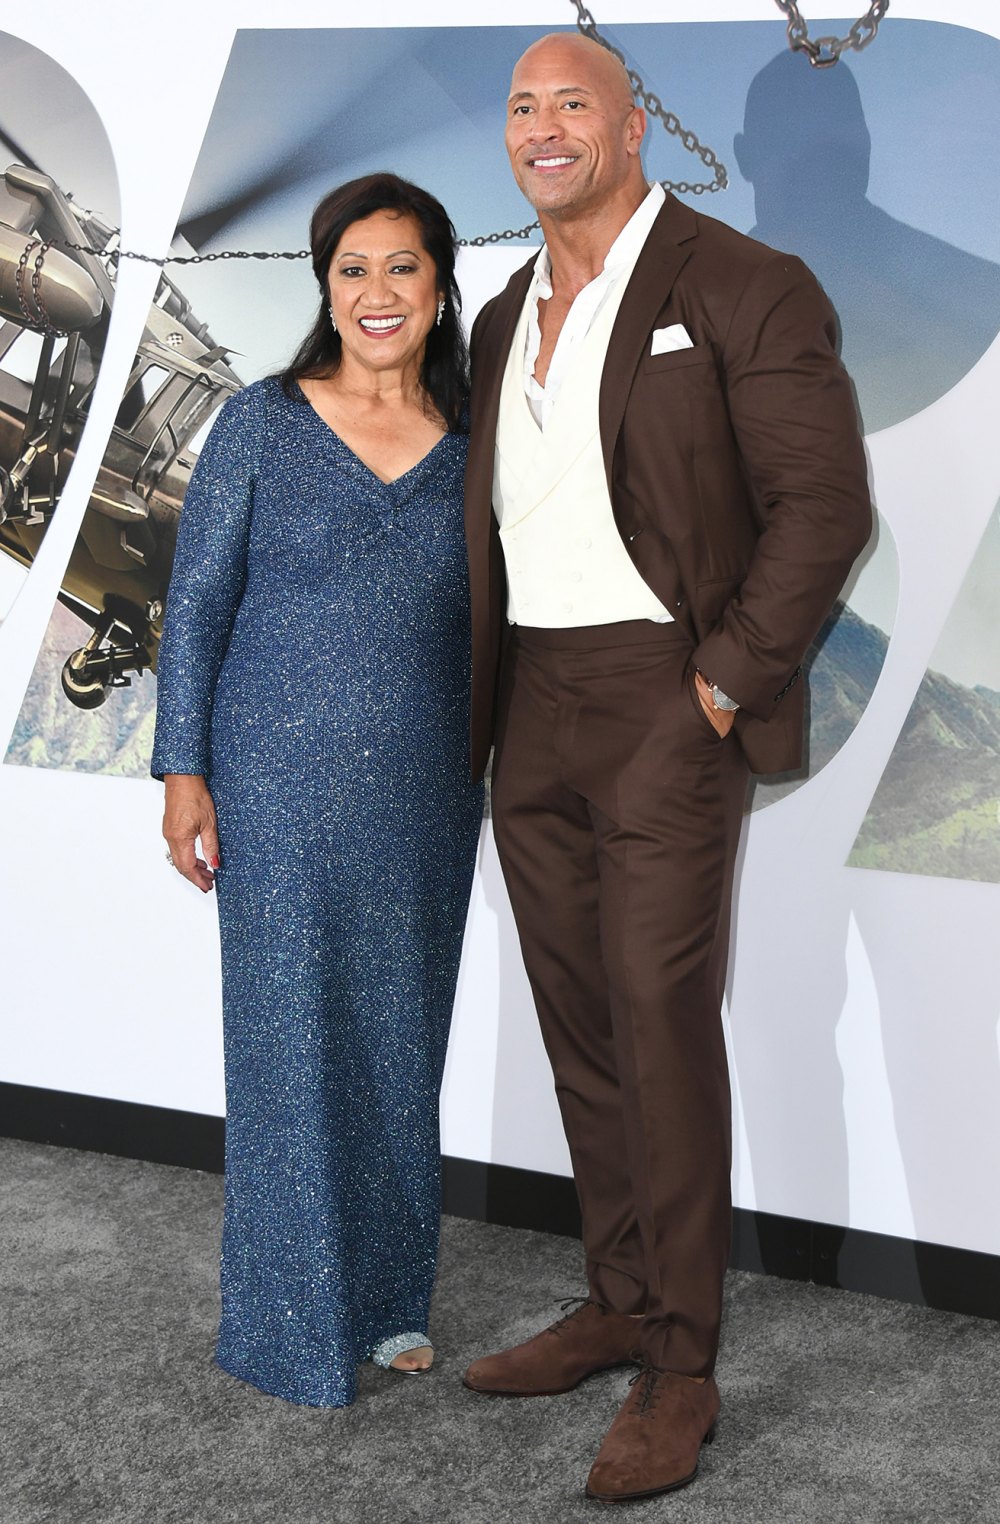 Dwayne Johnson reflects on how his mother inspired him to succeed after constant arrests